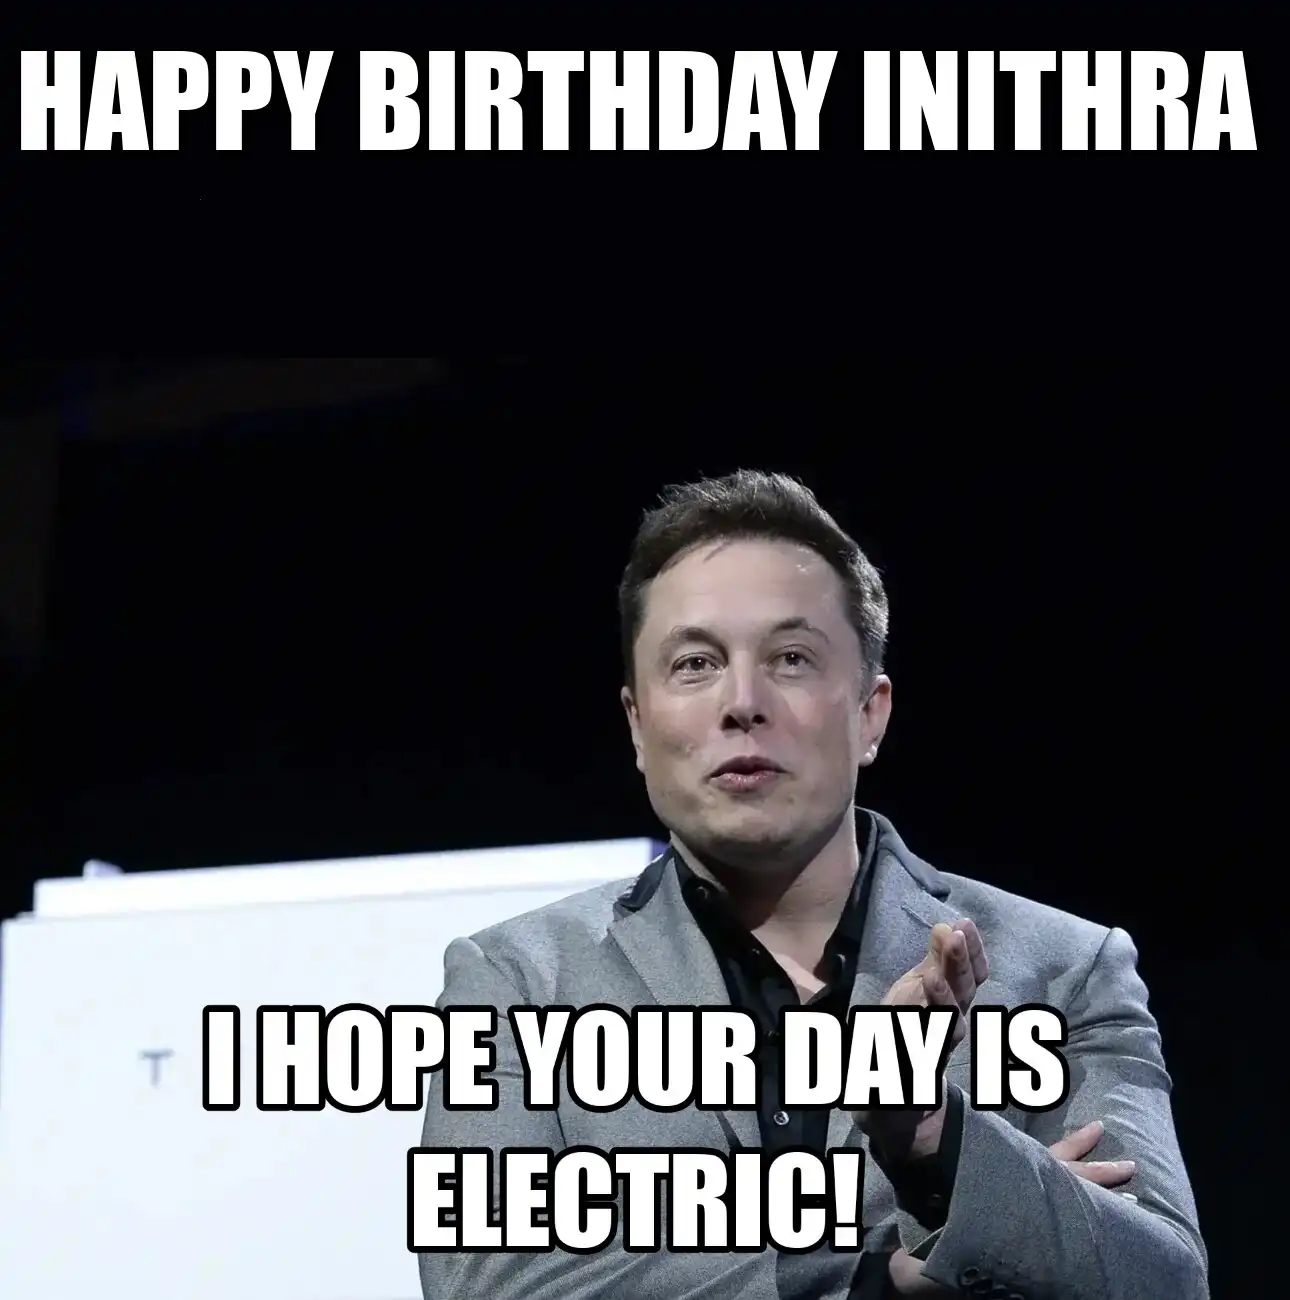 Happy Birthday Inithra I Hope Your Day Is Electric Meme